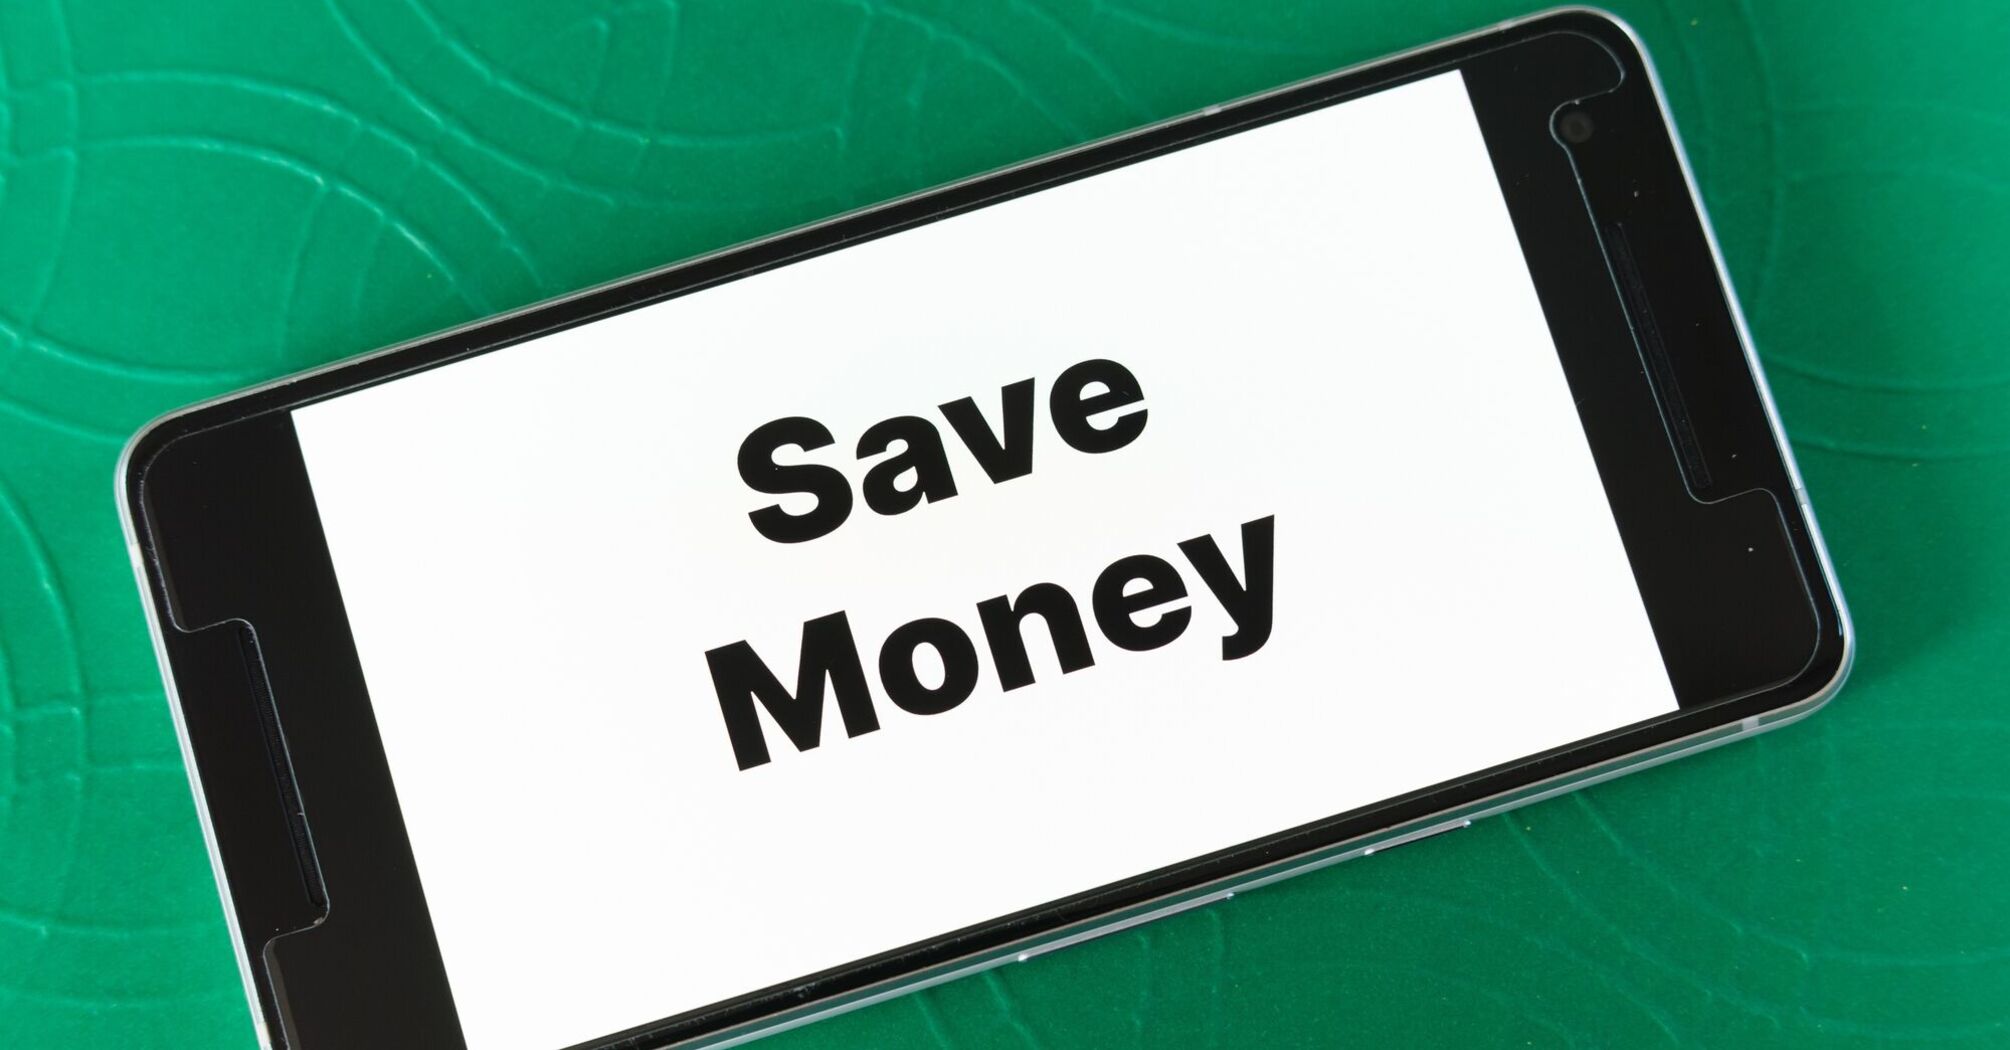 Smartphone screen displaying the words 'Save Money' on a green textured background